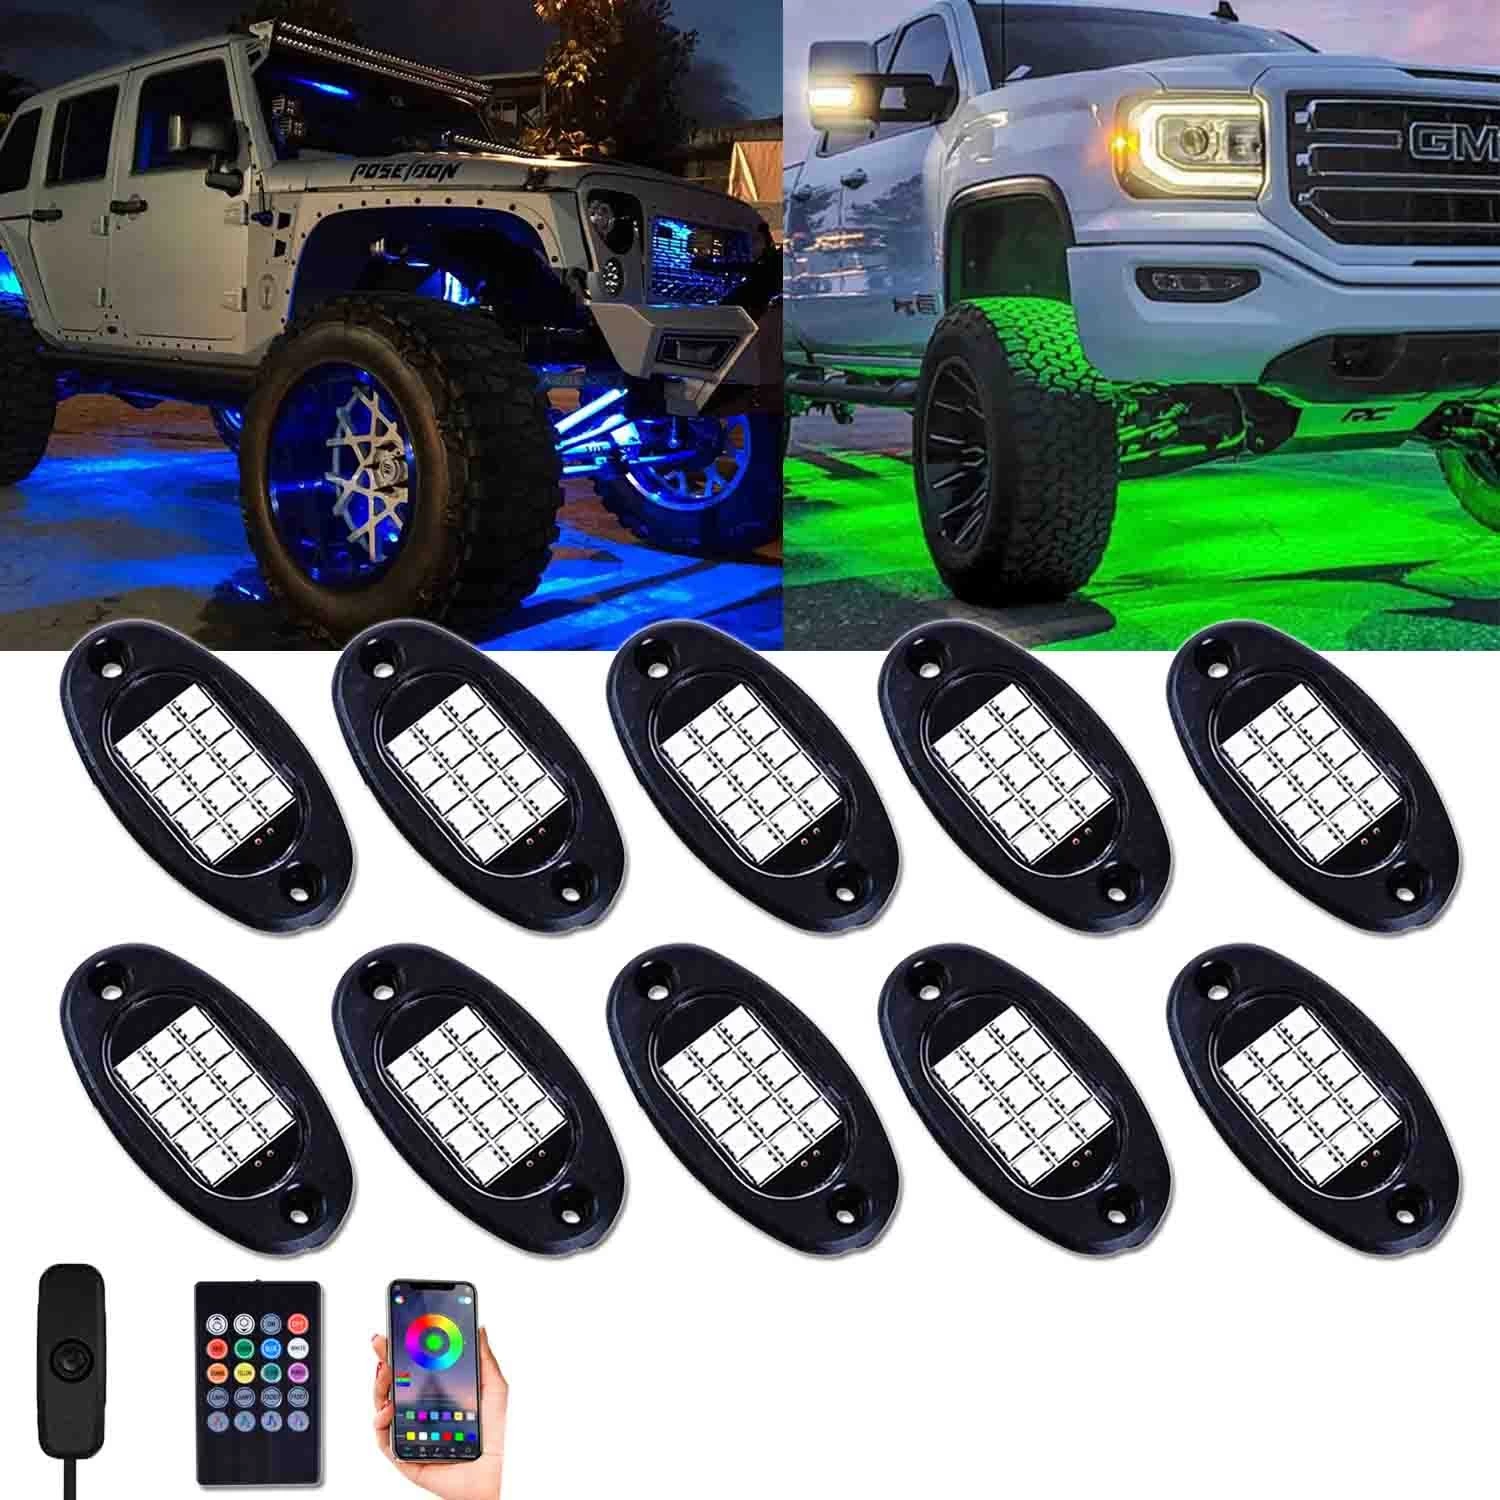 Cina Unionlux RGB LED Rock Lights 60 LEDs Multicolor Underglow Neon Lights Waterproof Aluminum Light Kit with RF/APP Control Music Mode Timing Function for Truck Jeep Off Road Car UTV ATV SUV 8 Packs produttore